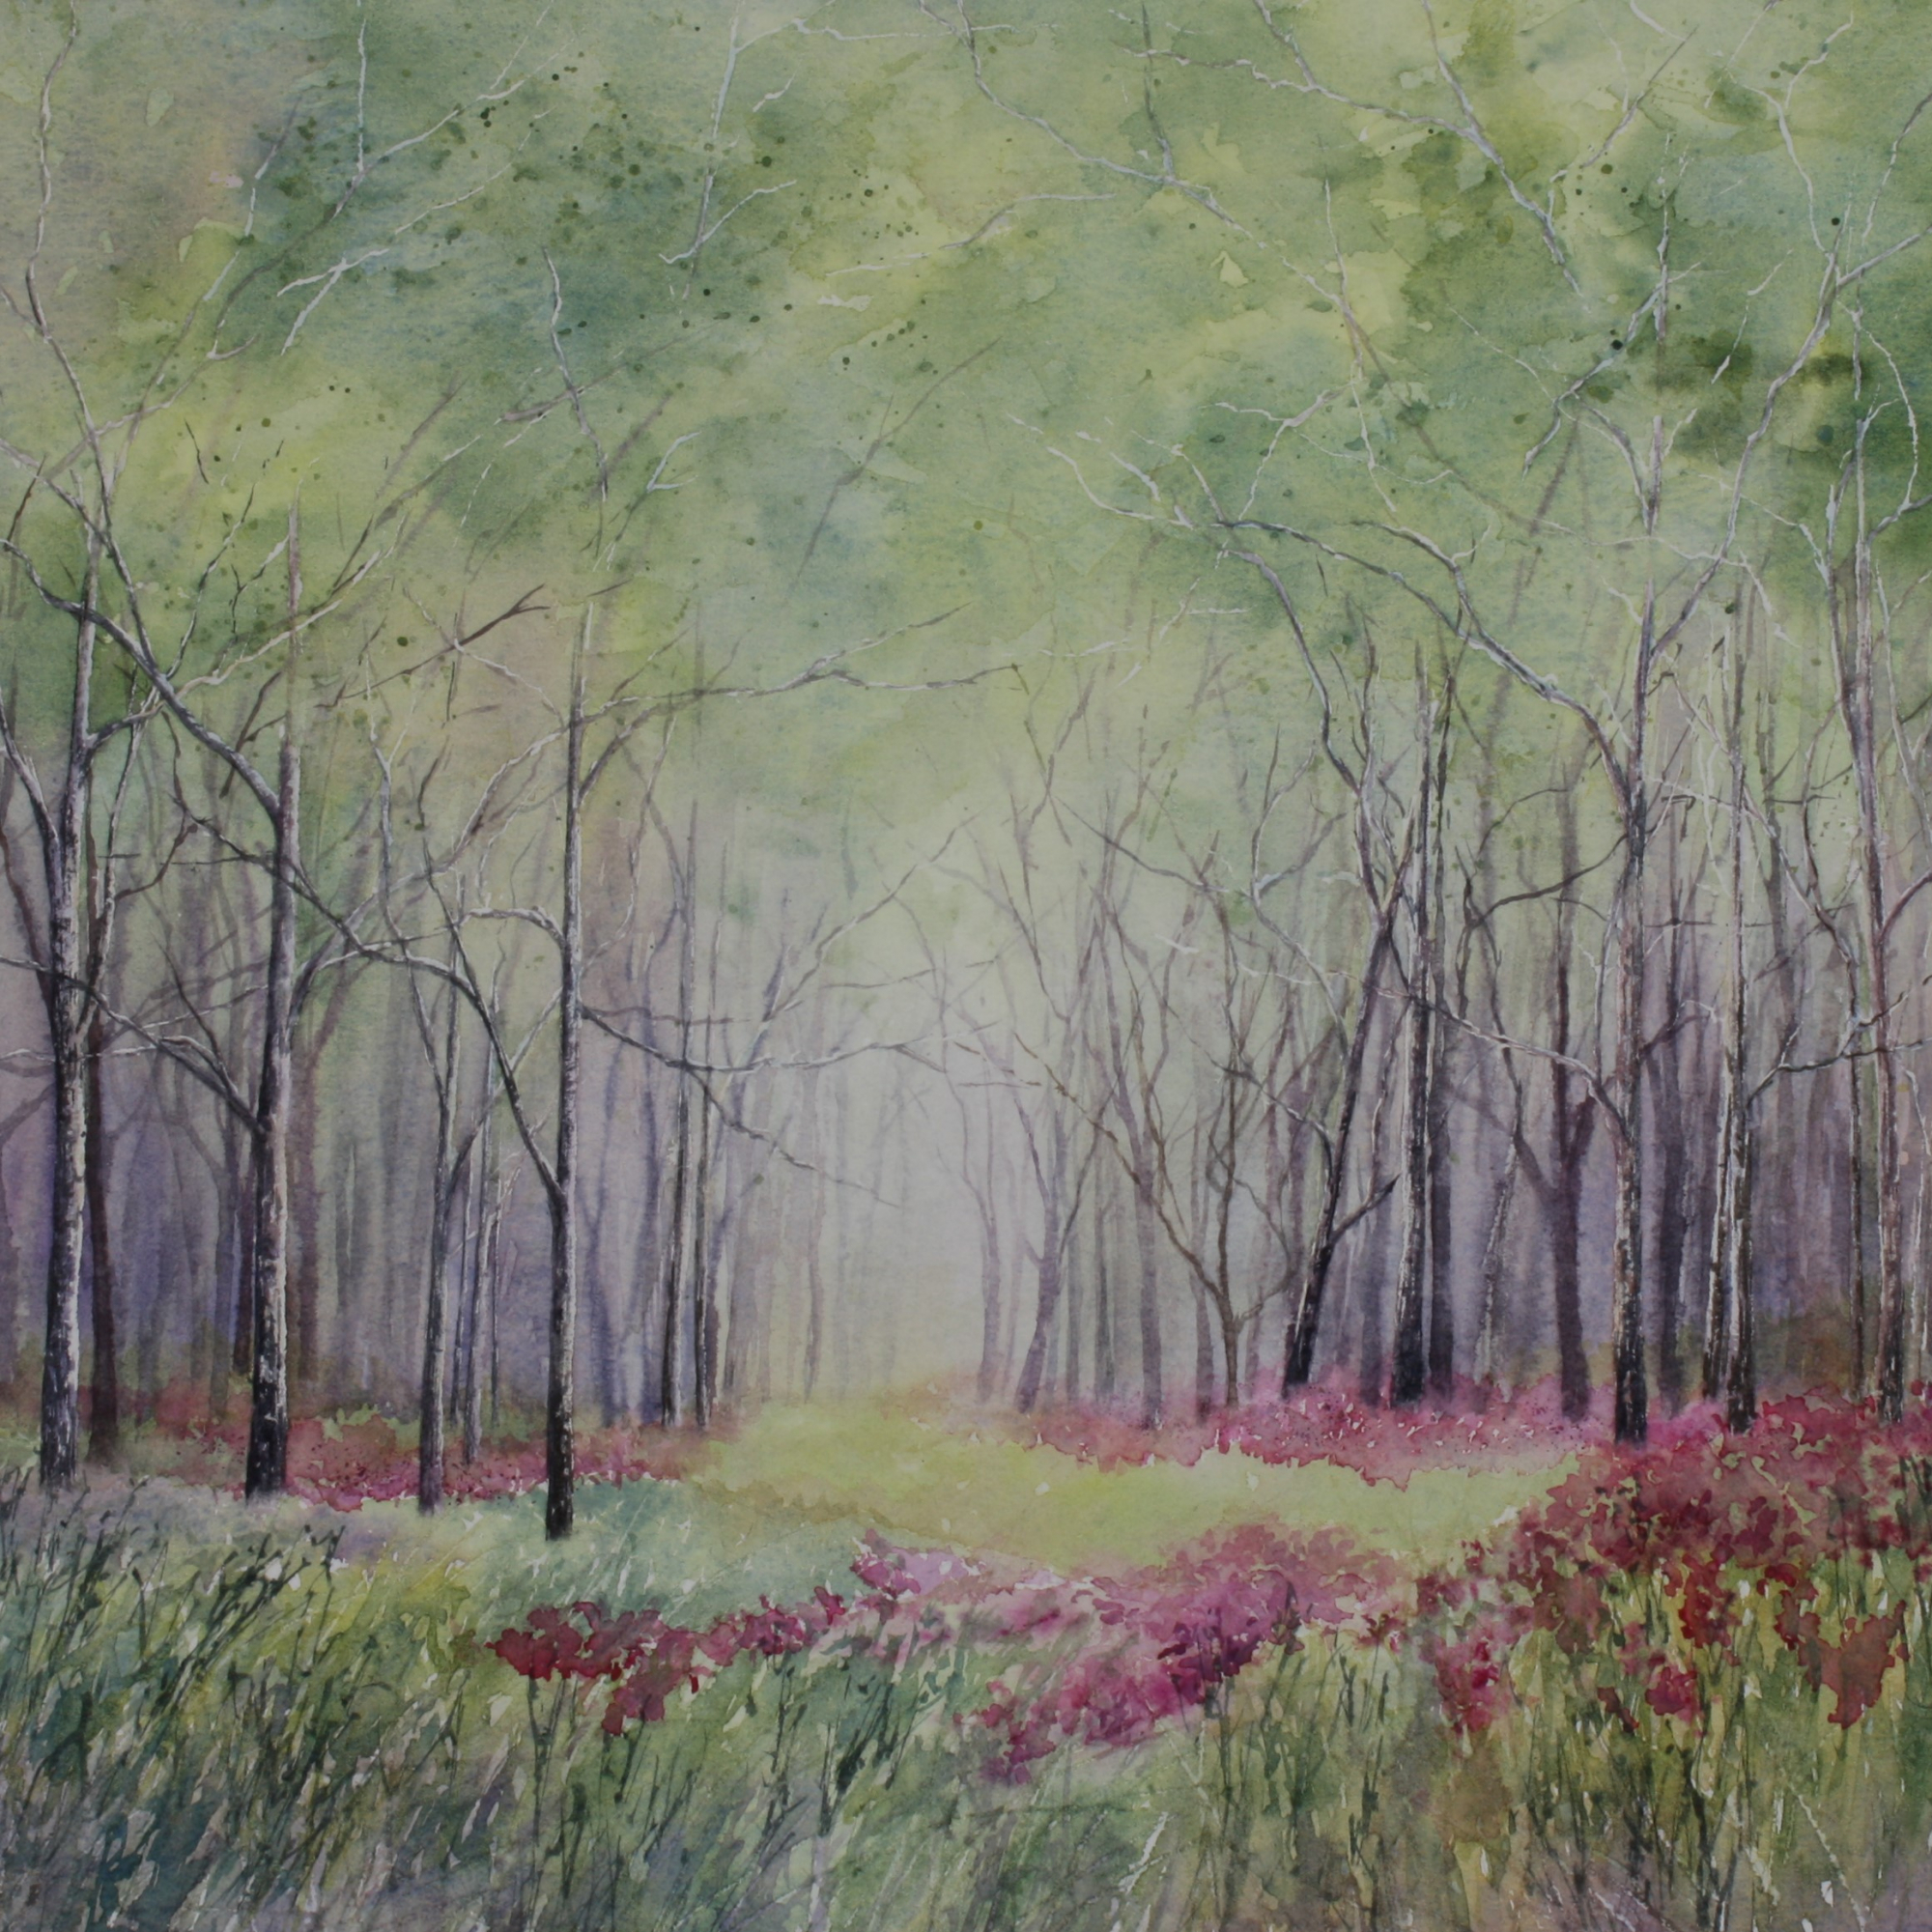 Misty woodland painting with pink flowers in the foreground